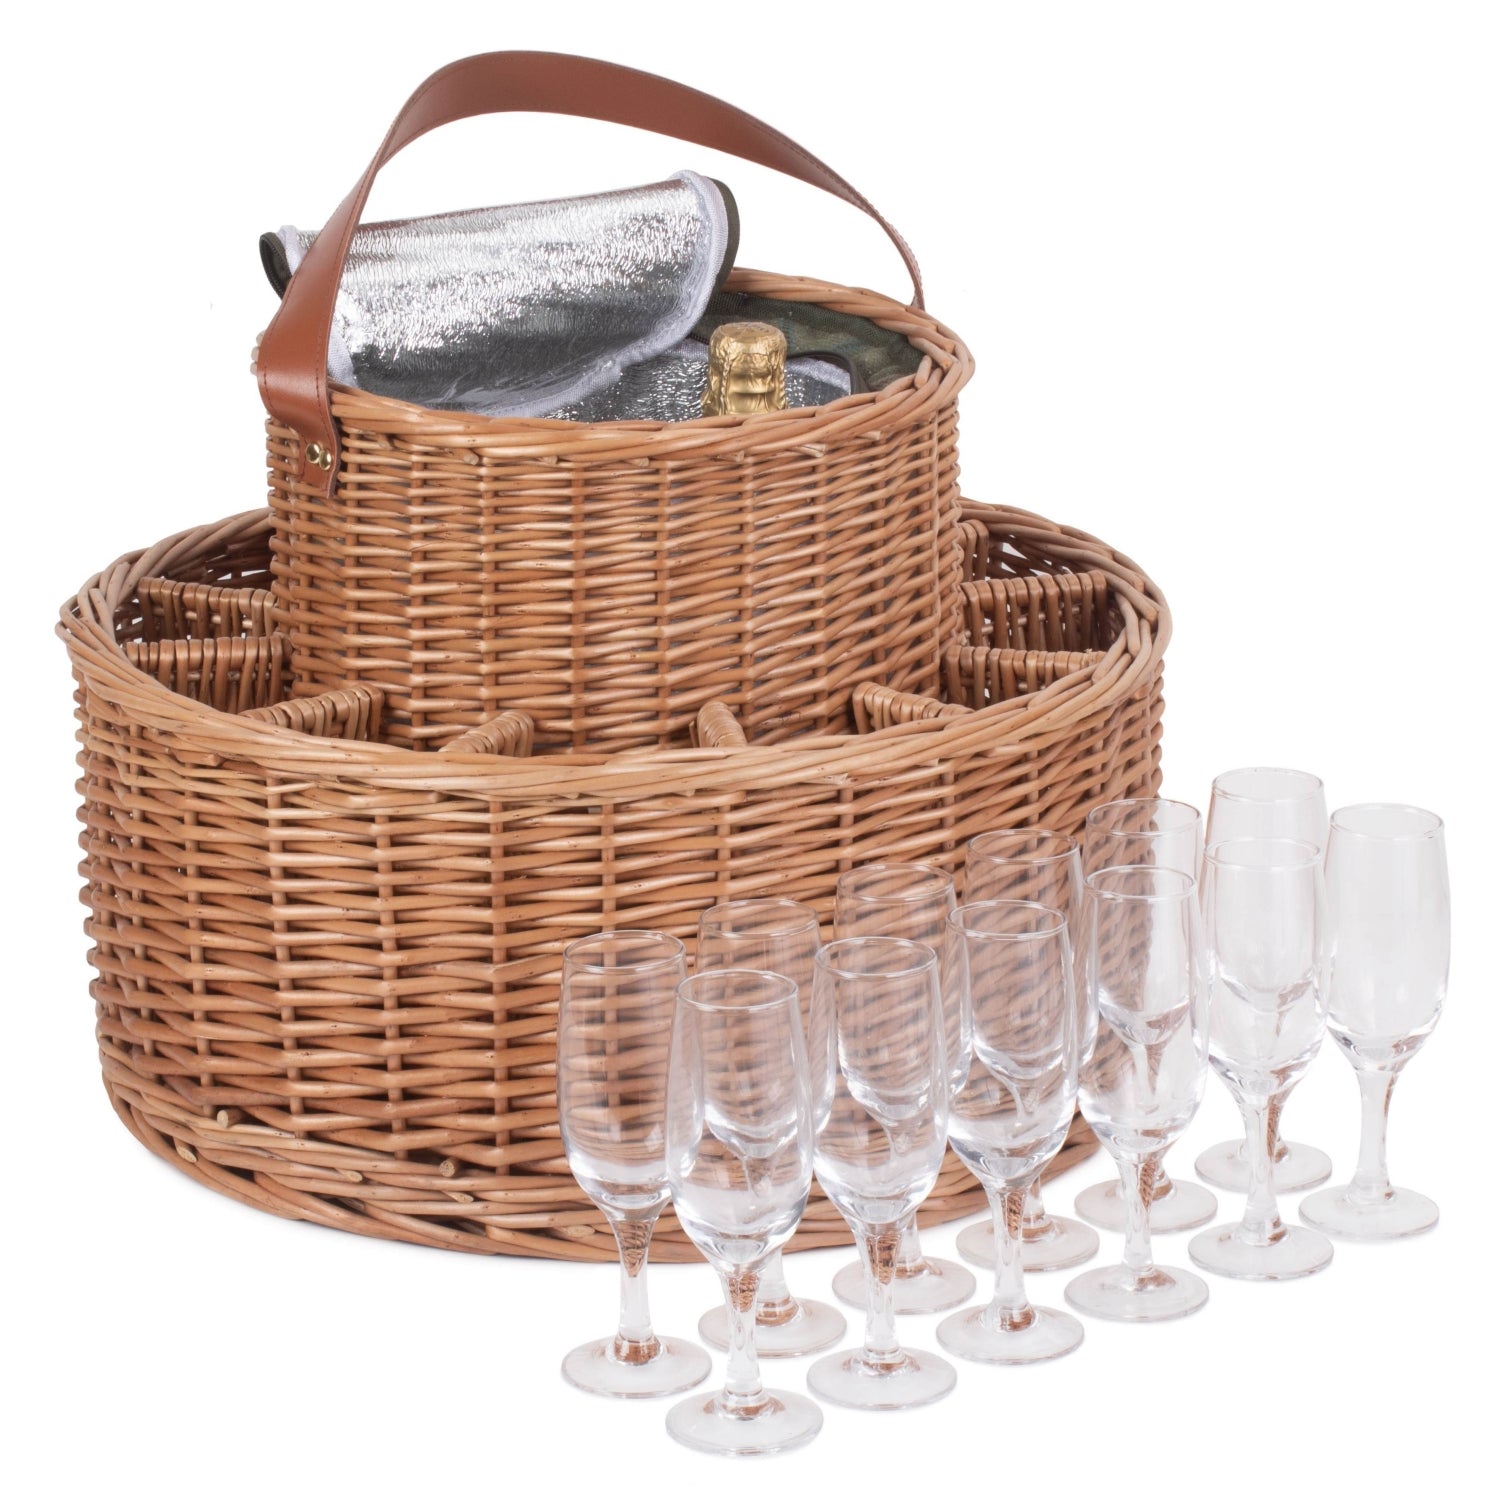 Red Hamper Green Tweed Chilled Garden Party Wicker Basket With Glasses